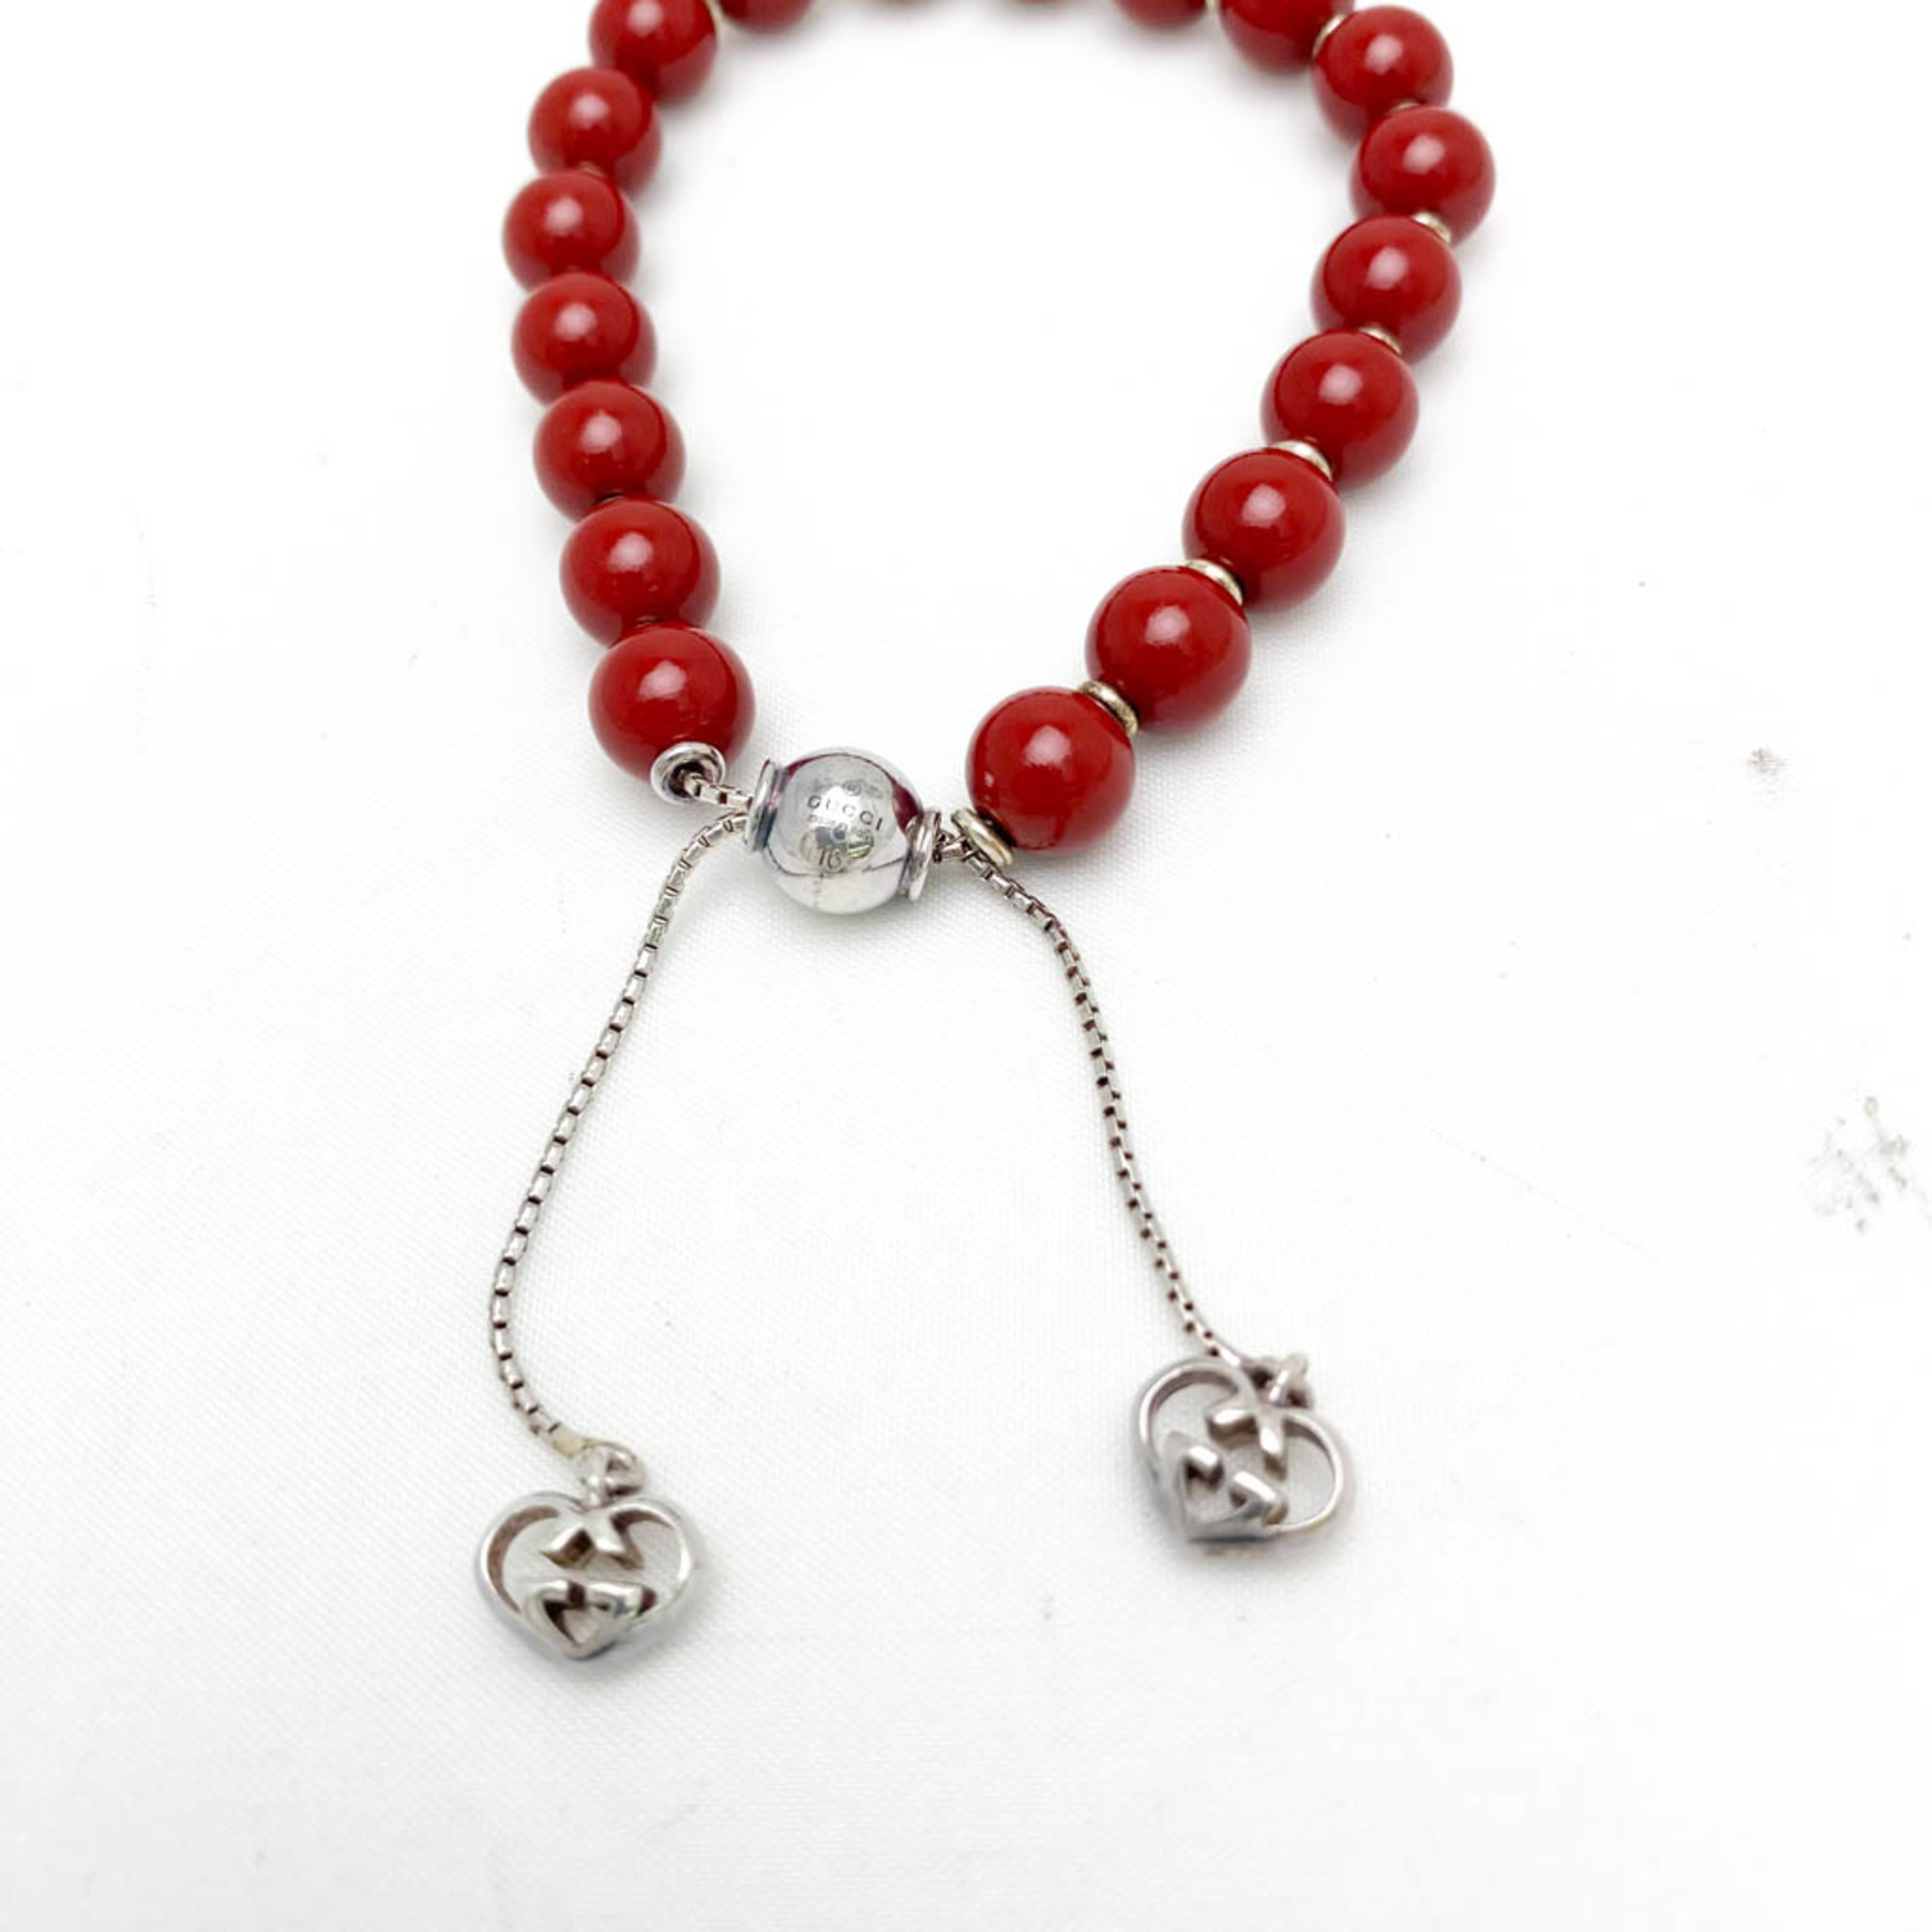 Gucci Wood Beads 286673 Silver 925 Charm Bracelet Red Color,Silver